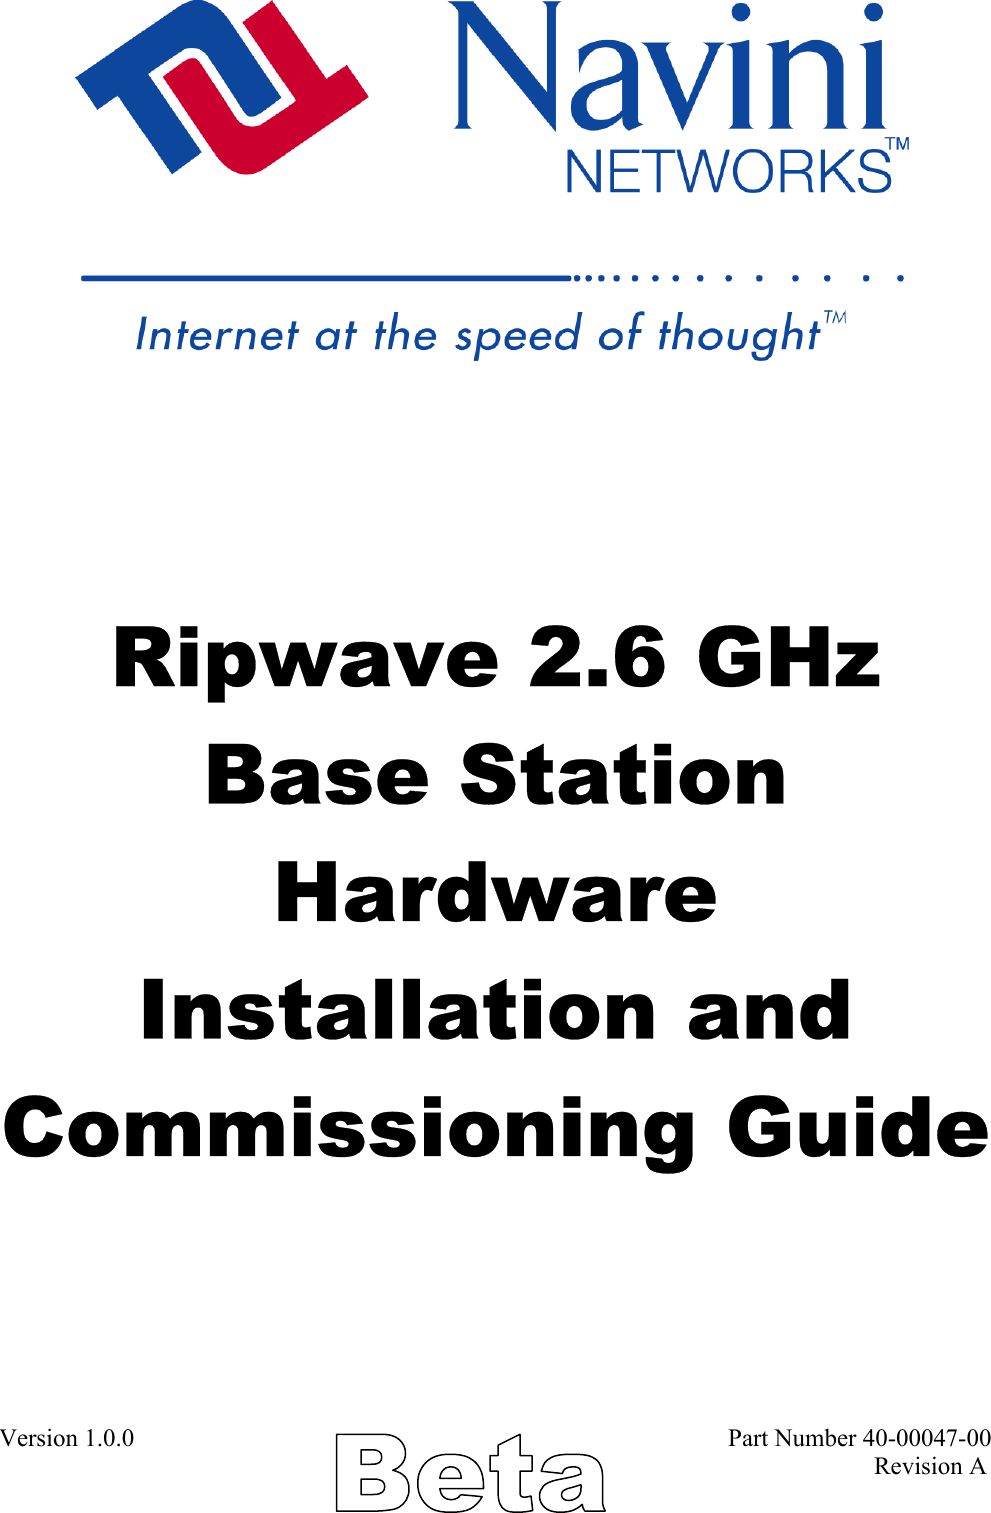           Ripwave 2.6 GHz  Base Station Hardware Installation and Commissioning Guide Version 1.0.0                                                                                               Part Number 40-00047-00                                                                                                                                             Revision A 